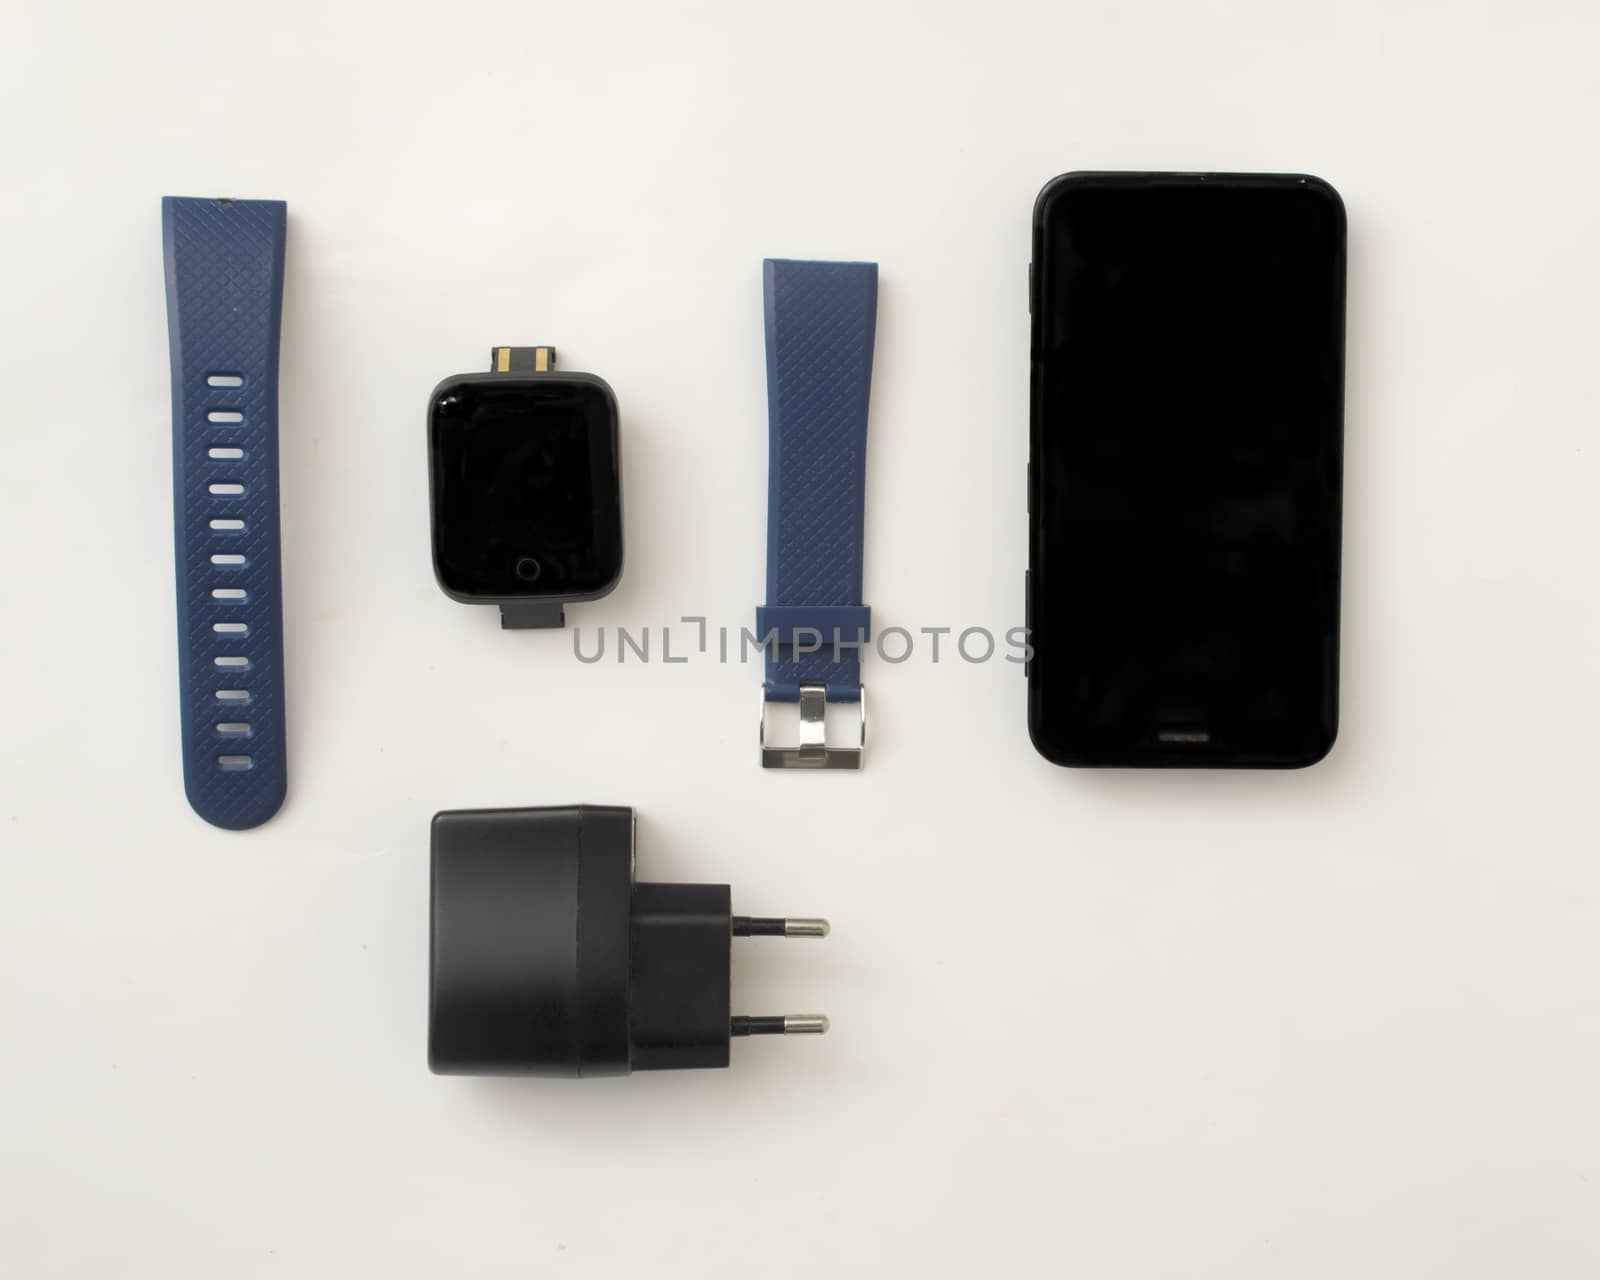 Layout of smart watch accessories.Smart watch, two silicon watchbands,smartphone and charger on white background